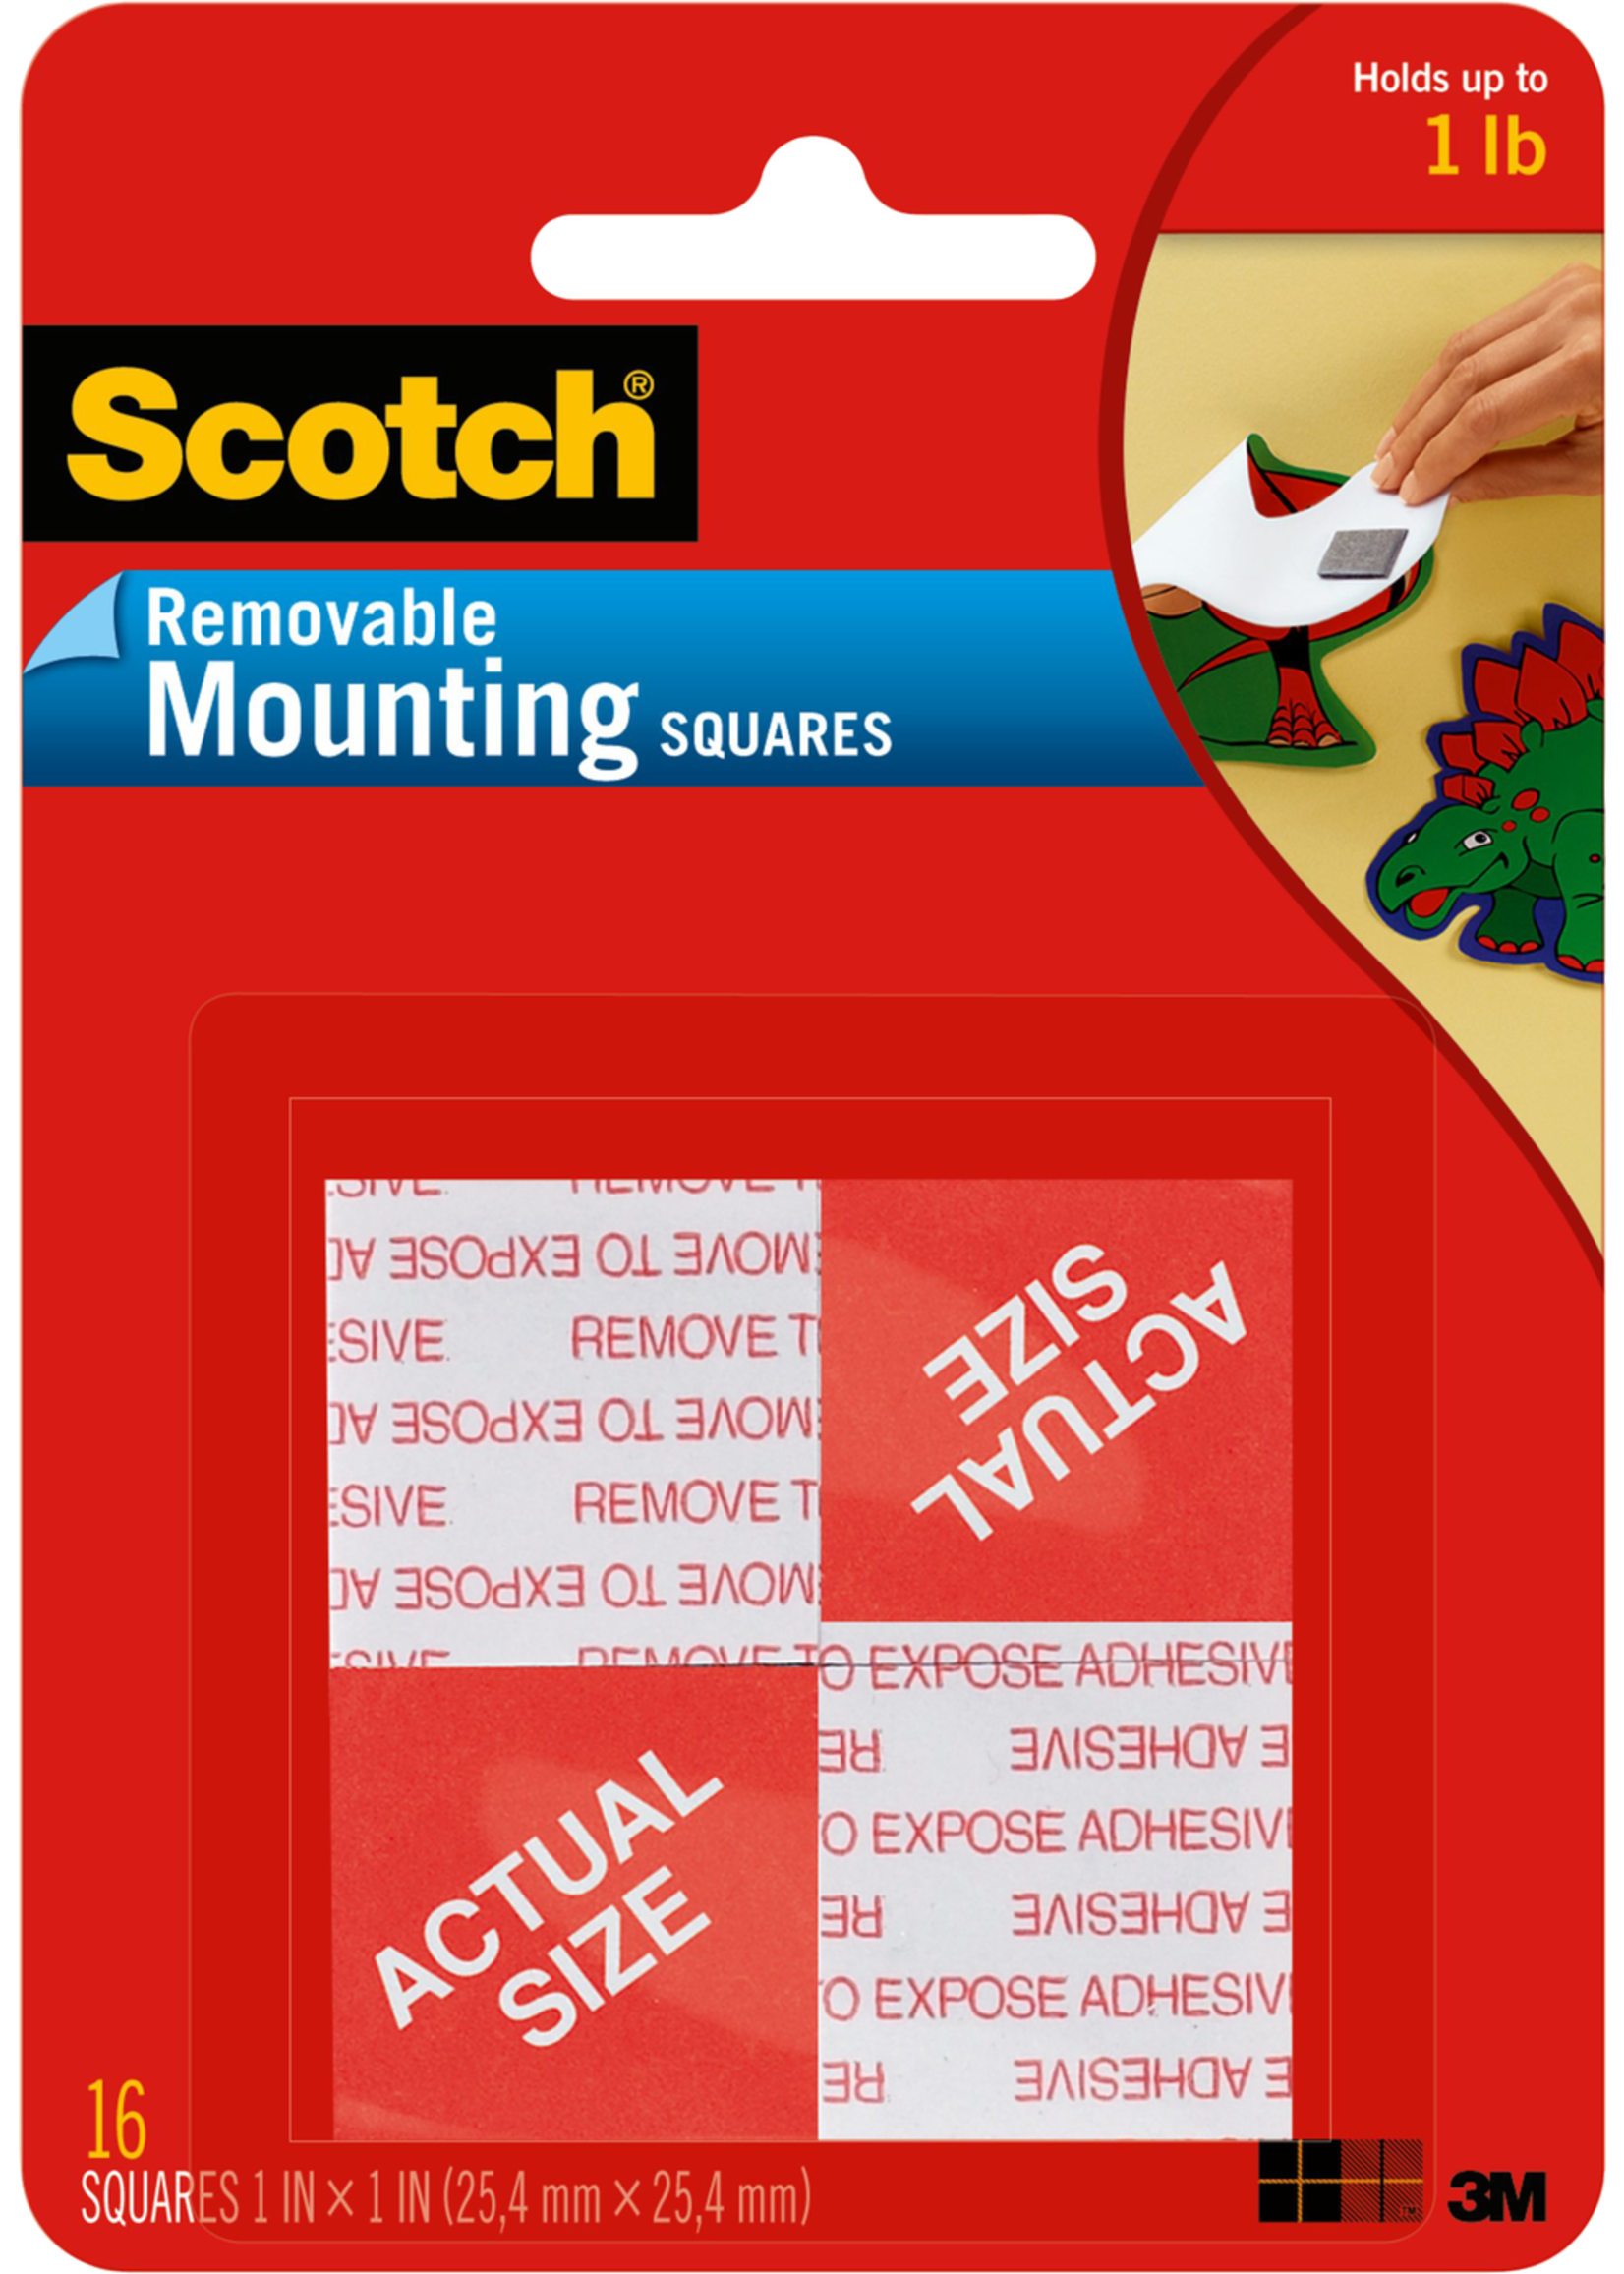 Scotch Removable Mounting Squares 16pk - North Central College Campus Store